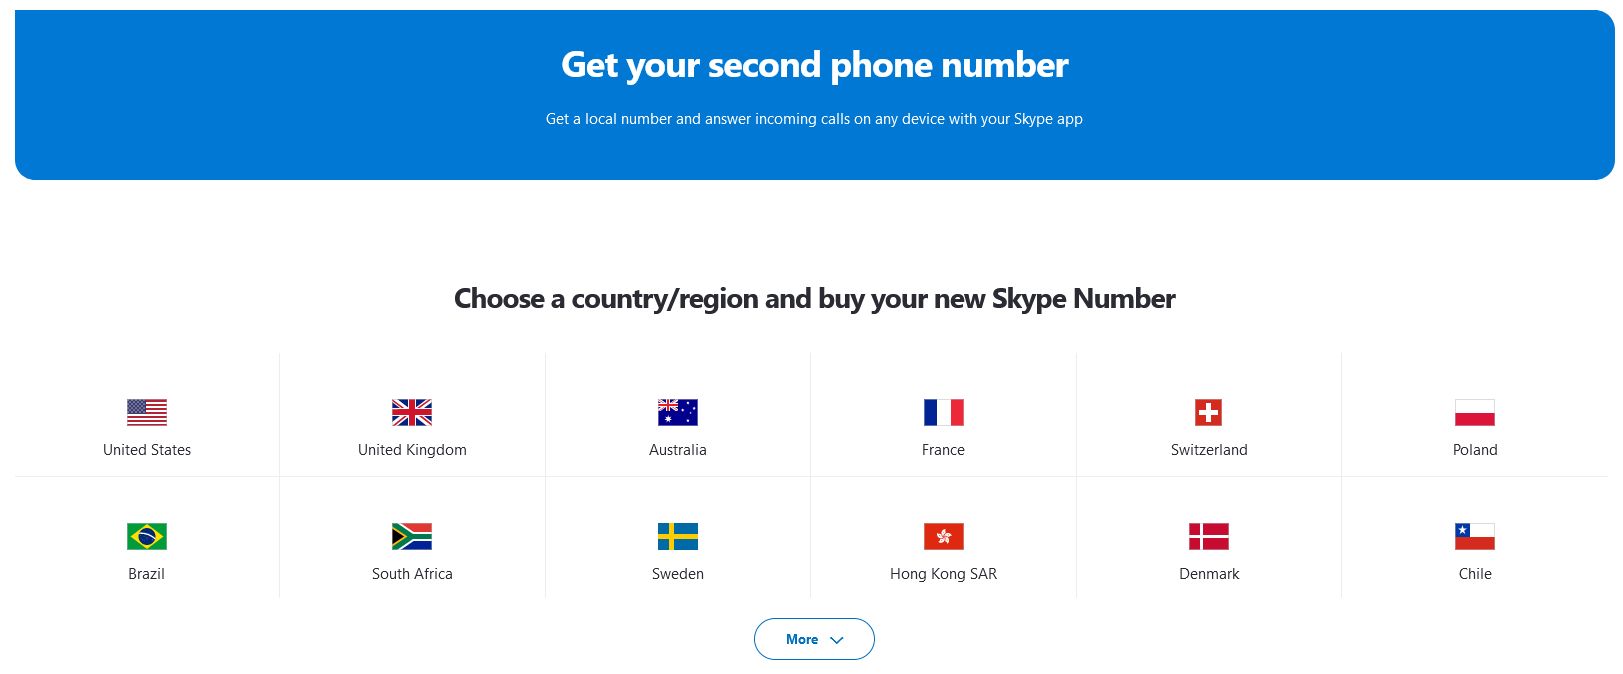 skype get your second phone number